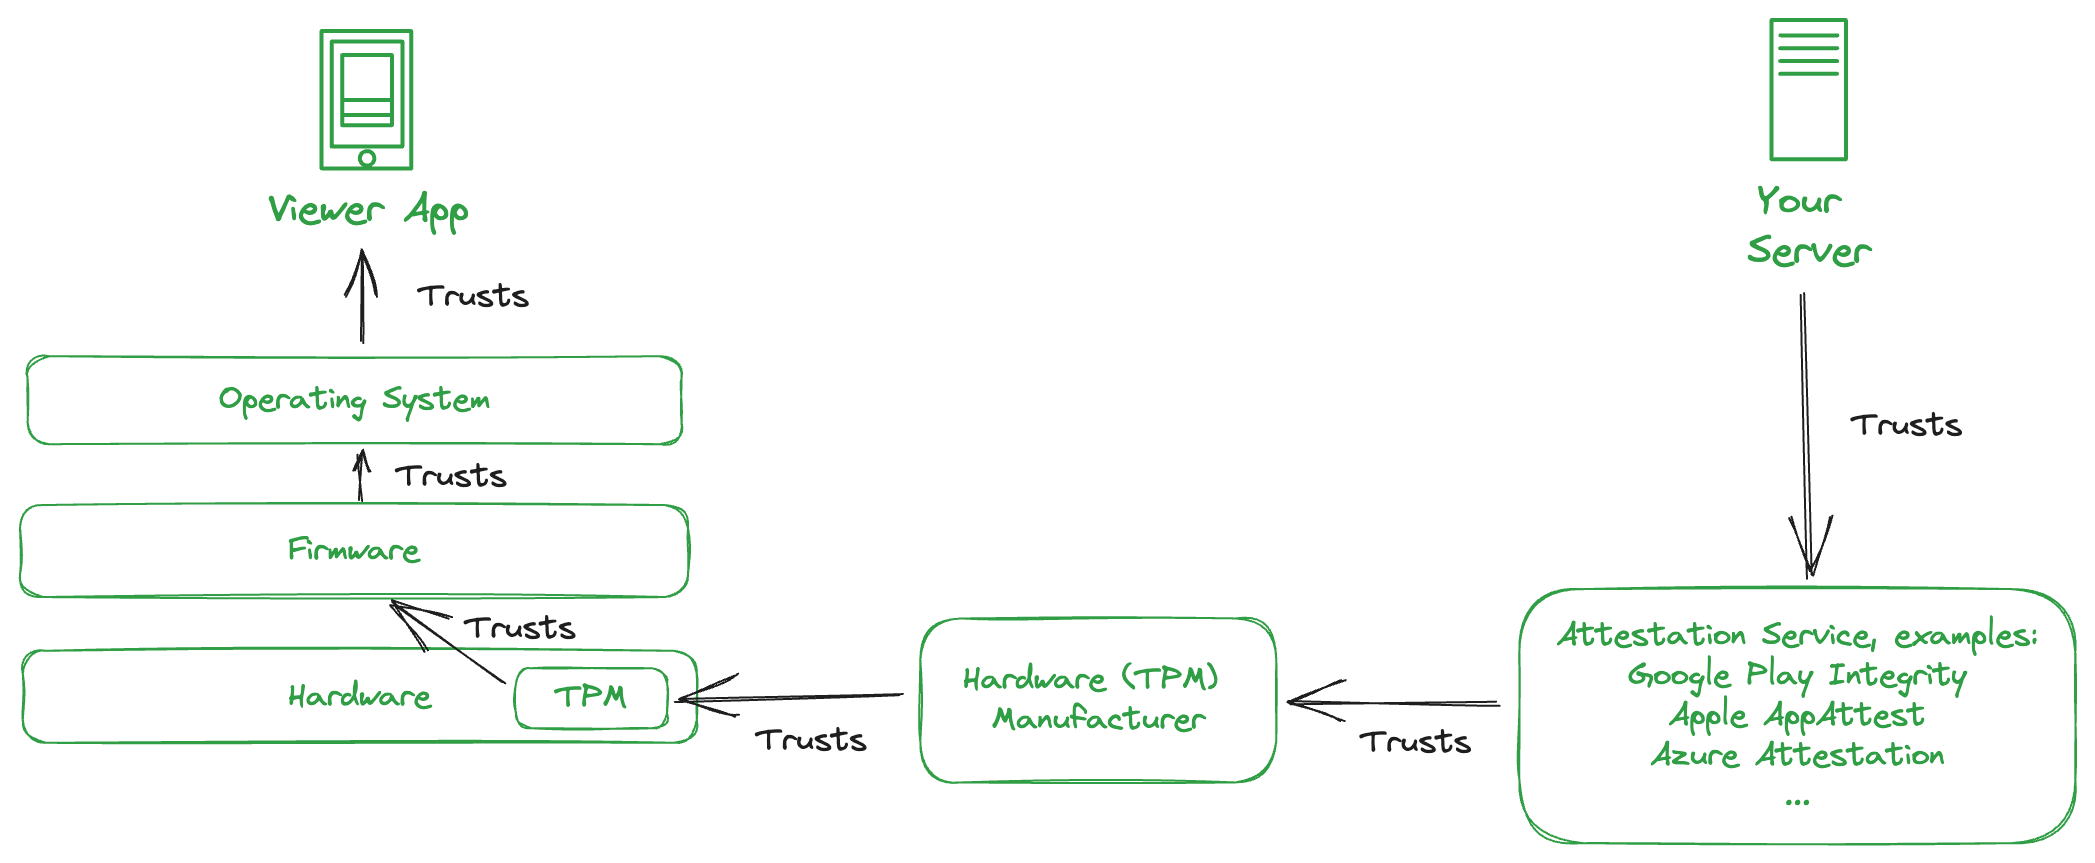 Visualization of the chain of trust